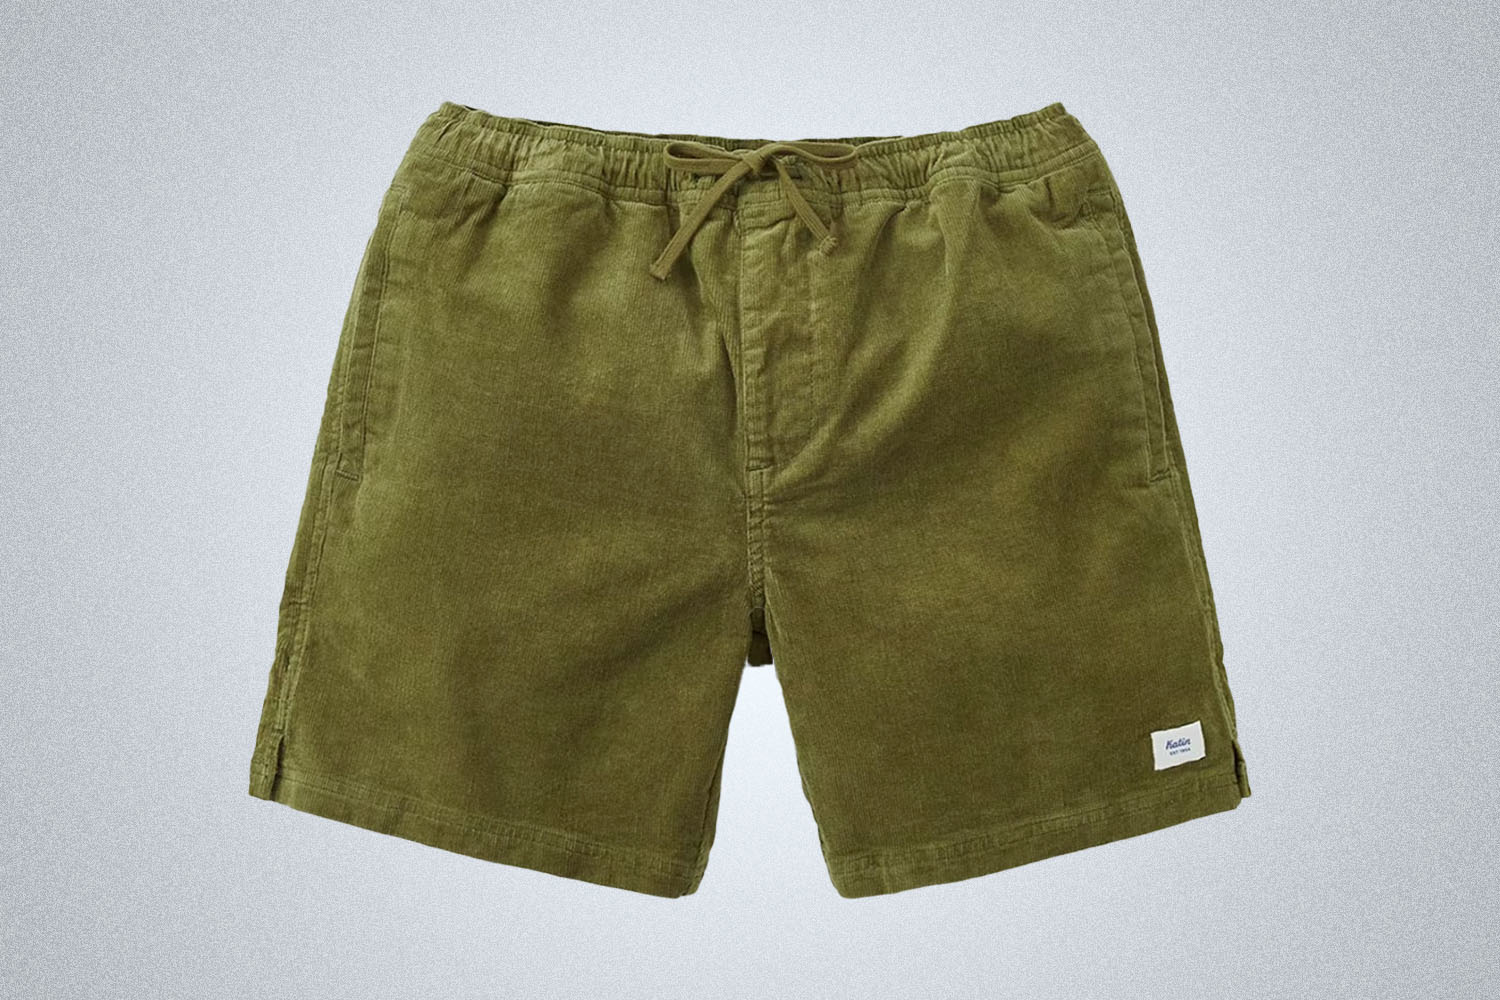 a pair of green Katin corduroy shorts on a grey background